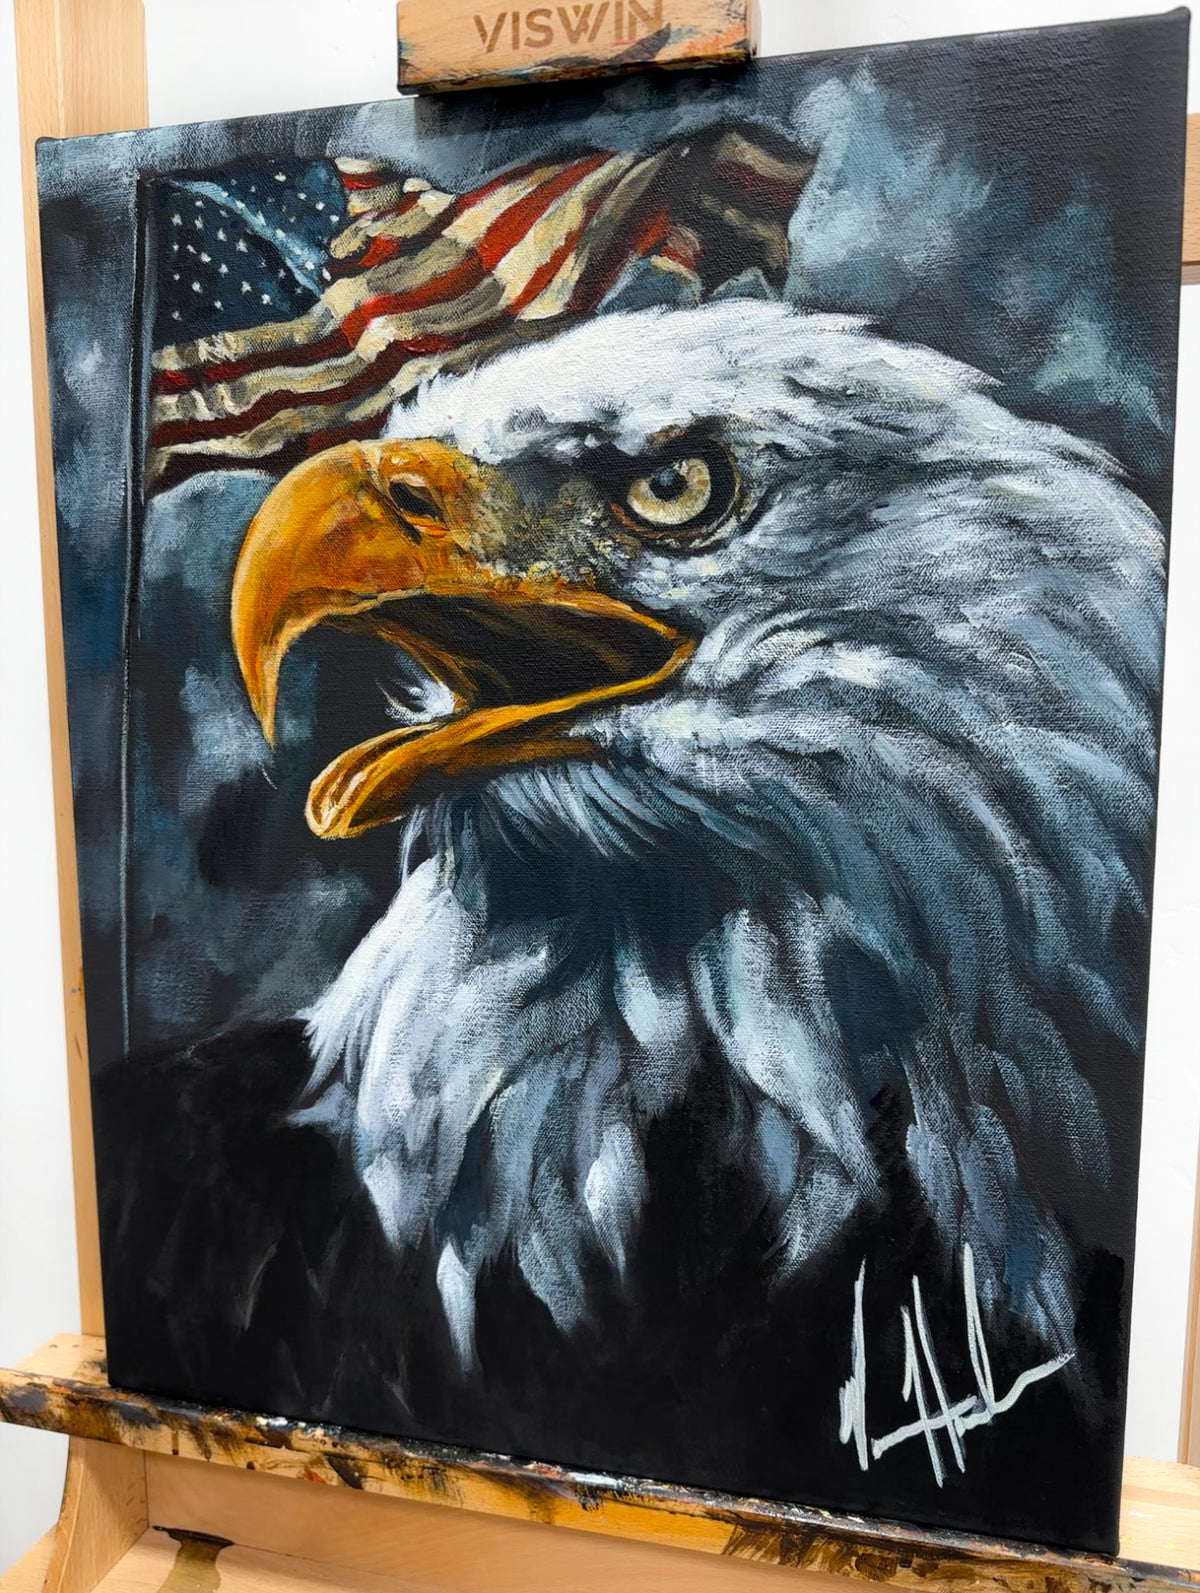 The Revival of Freedom - 16”x20” Original Acrylic Painting